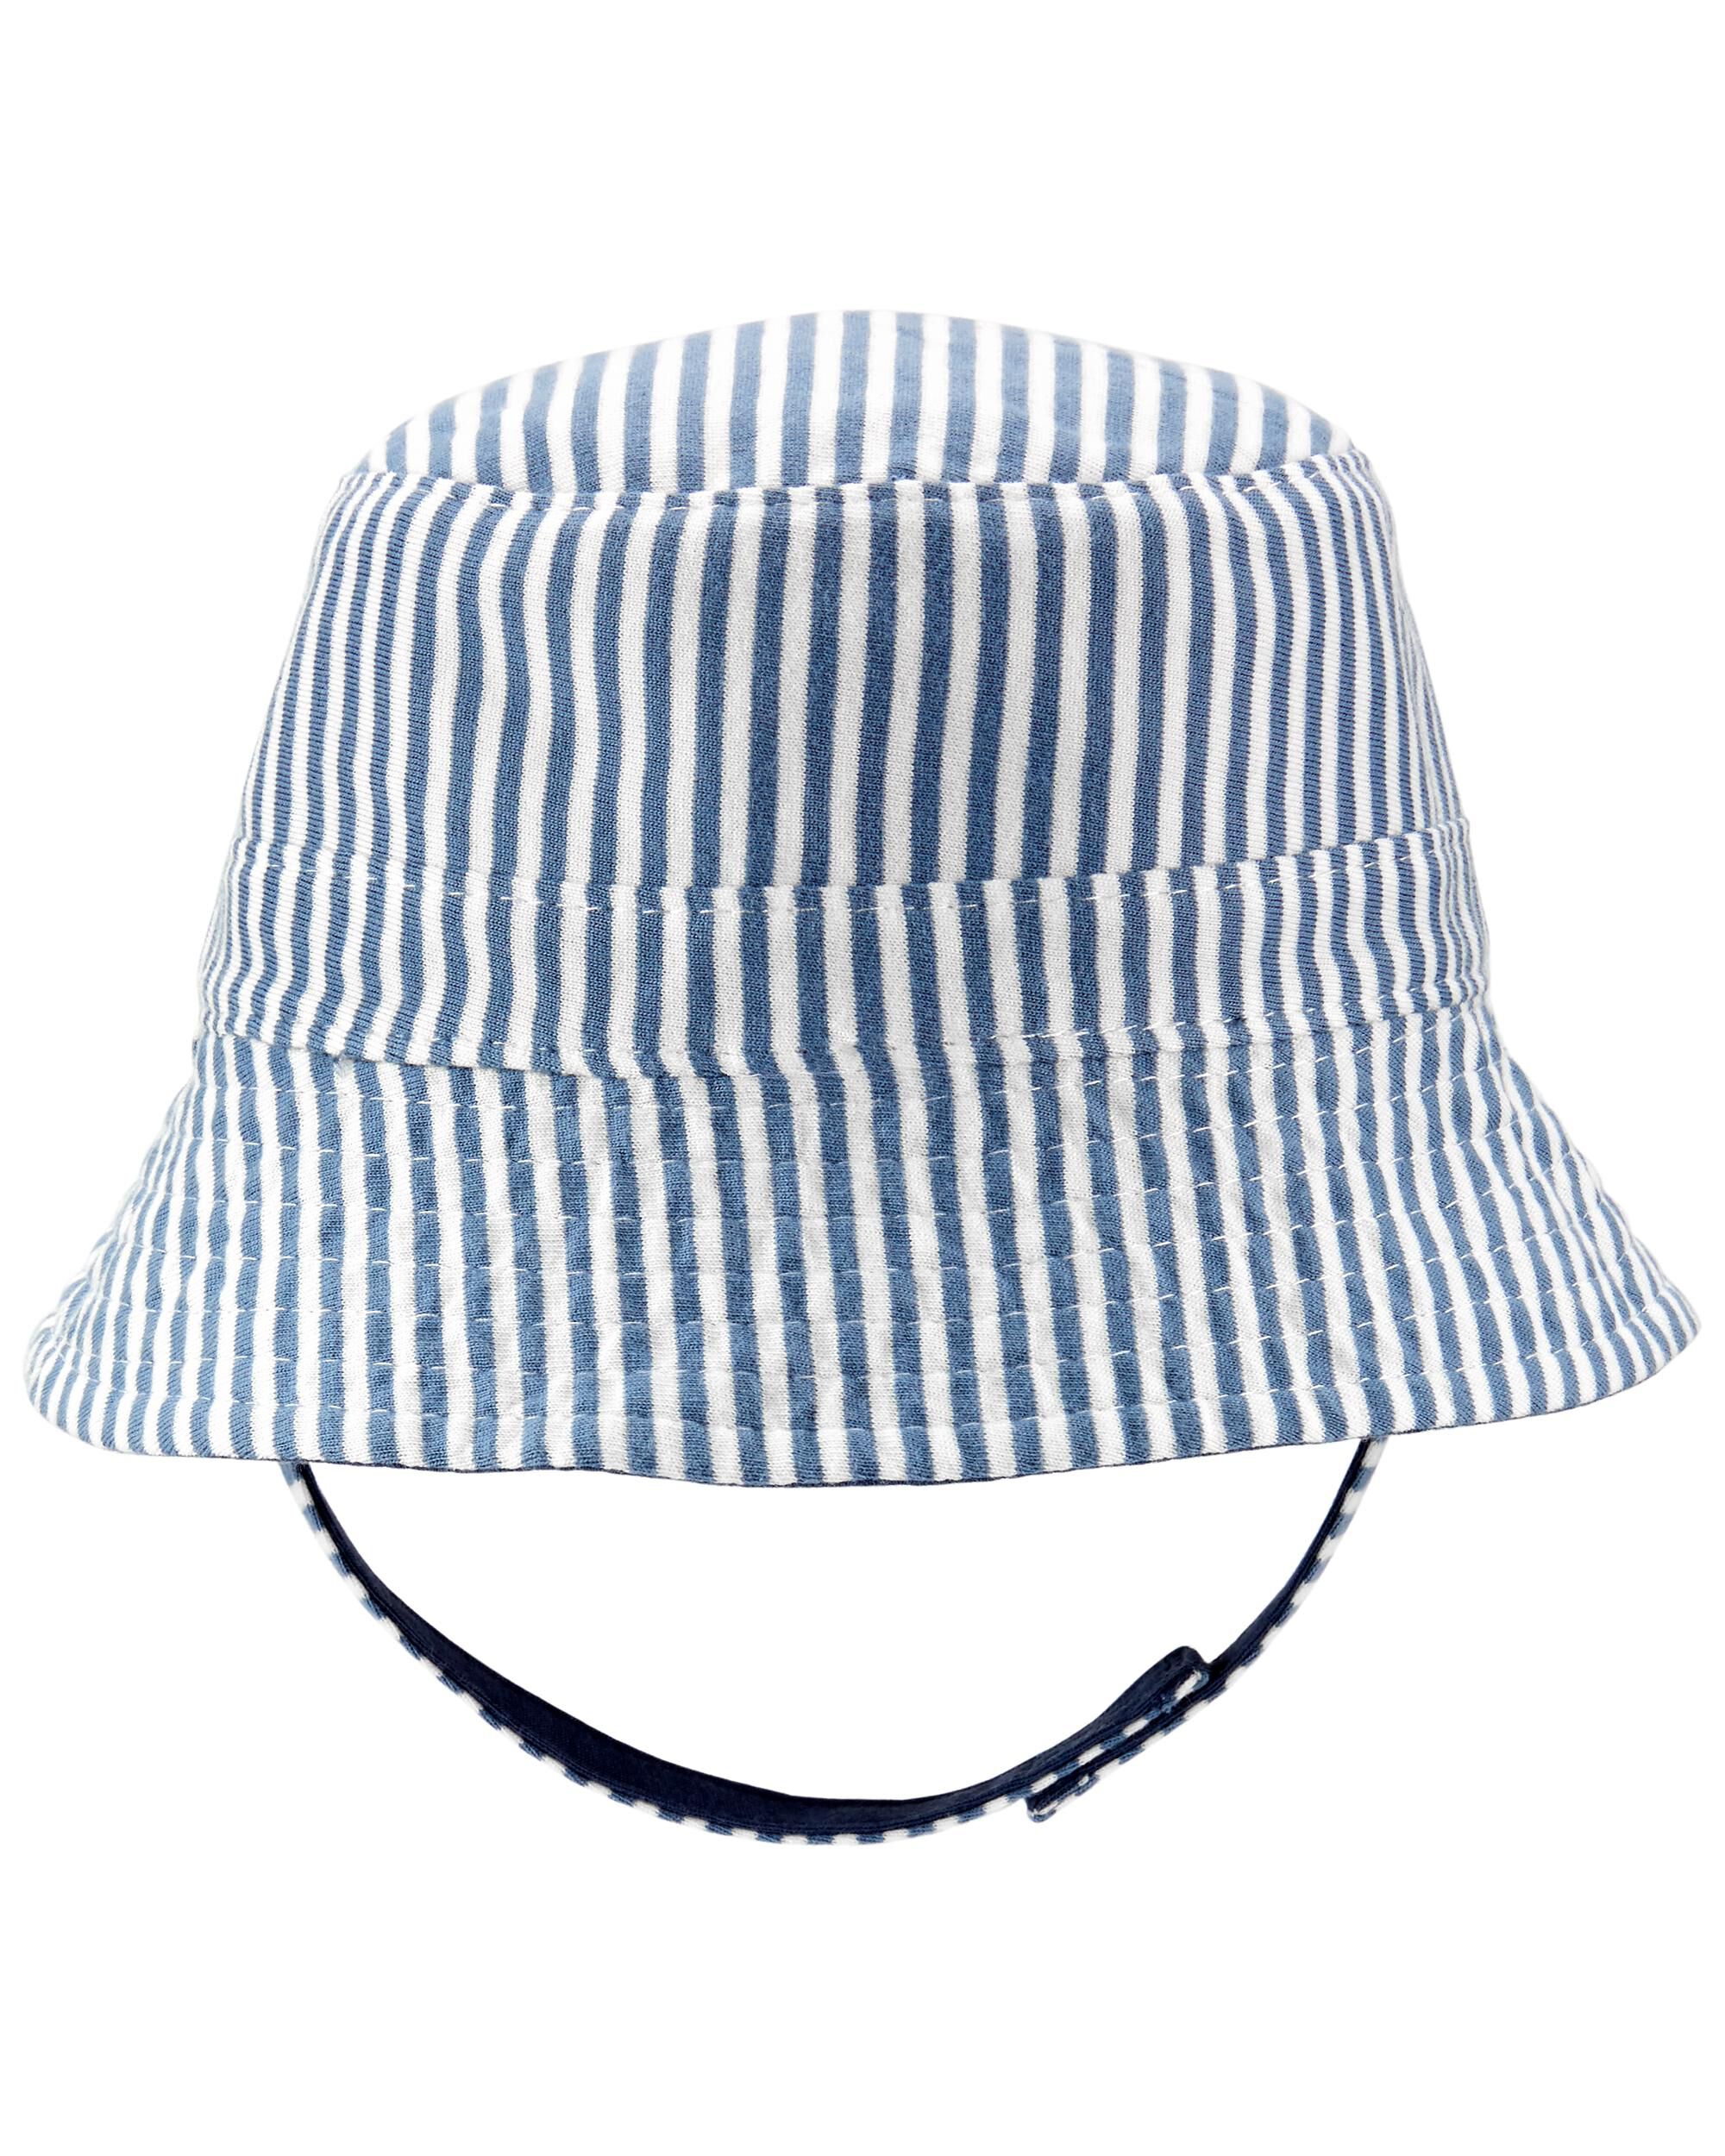 Carter's Baby Infant CHAMBRAY Bucket SUN Hat 12-24 mo UPF 50 NEW WIDE BRIM 